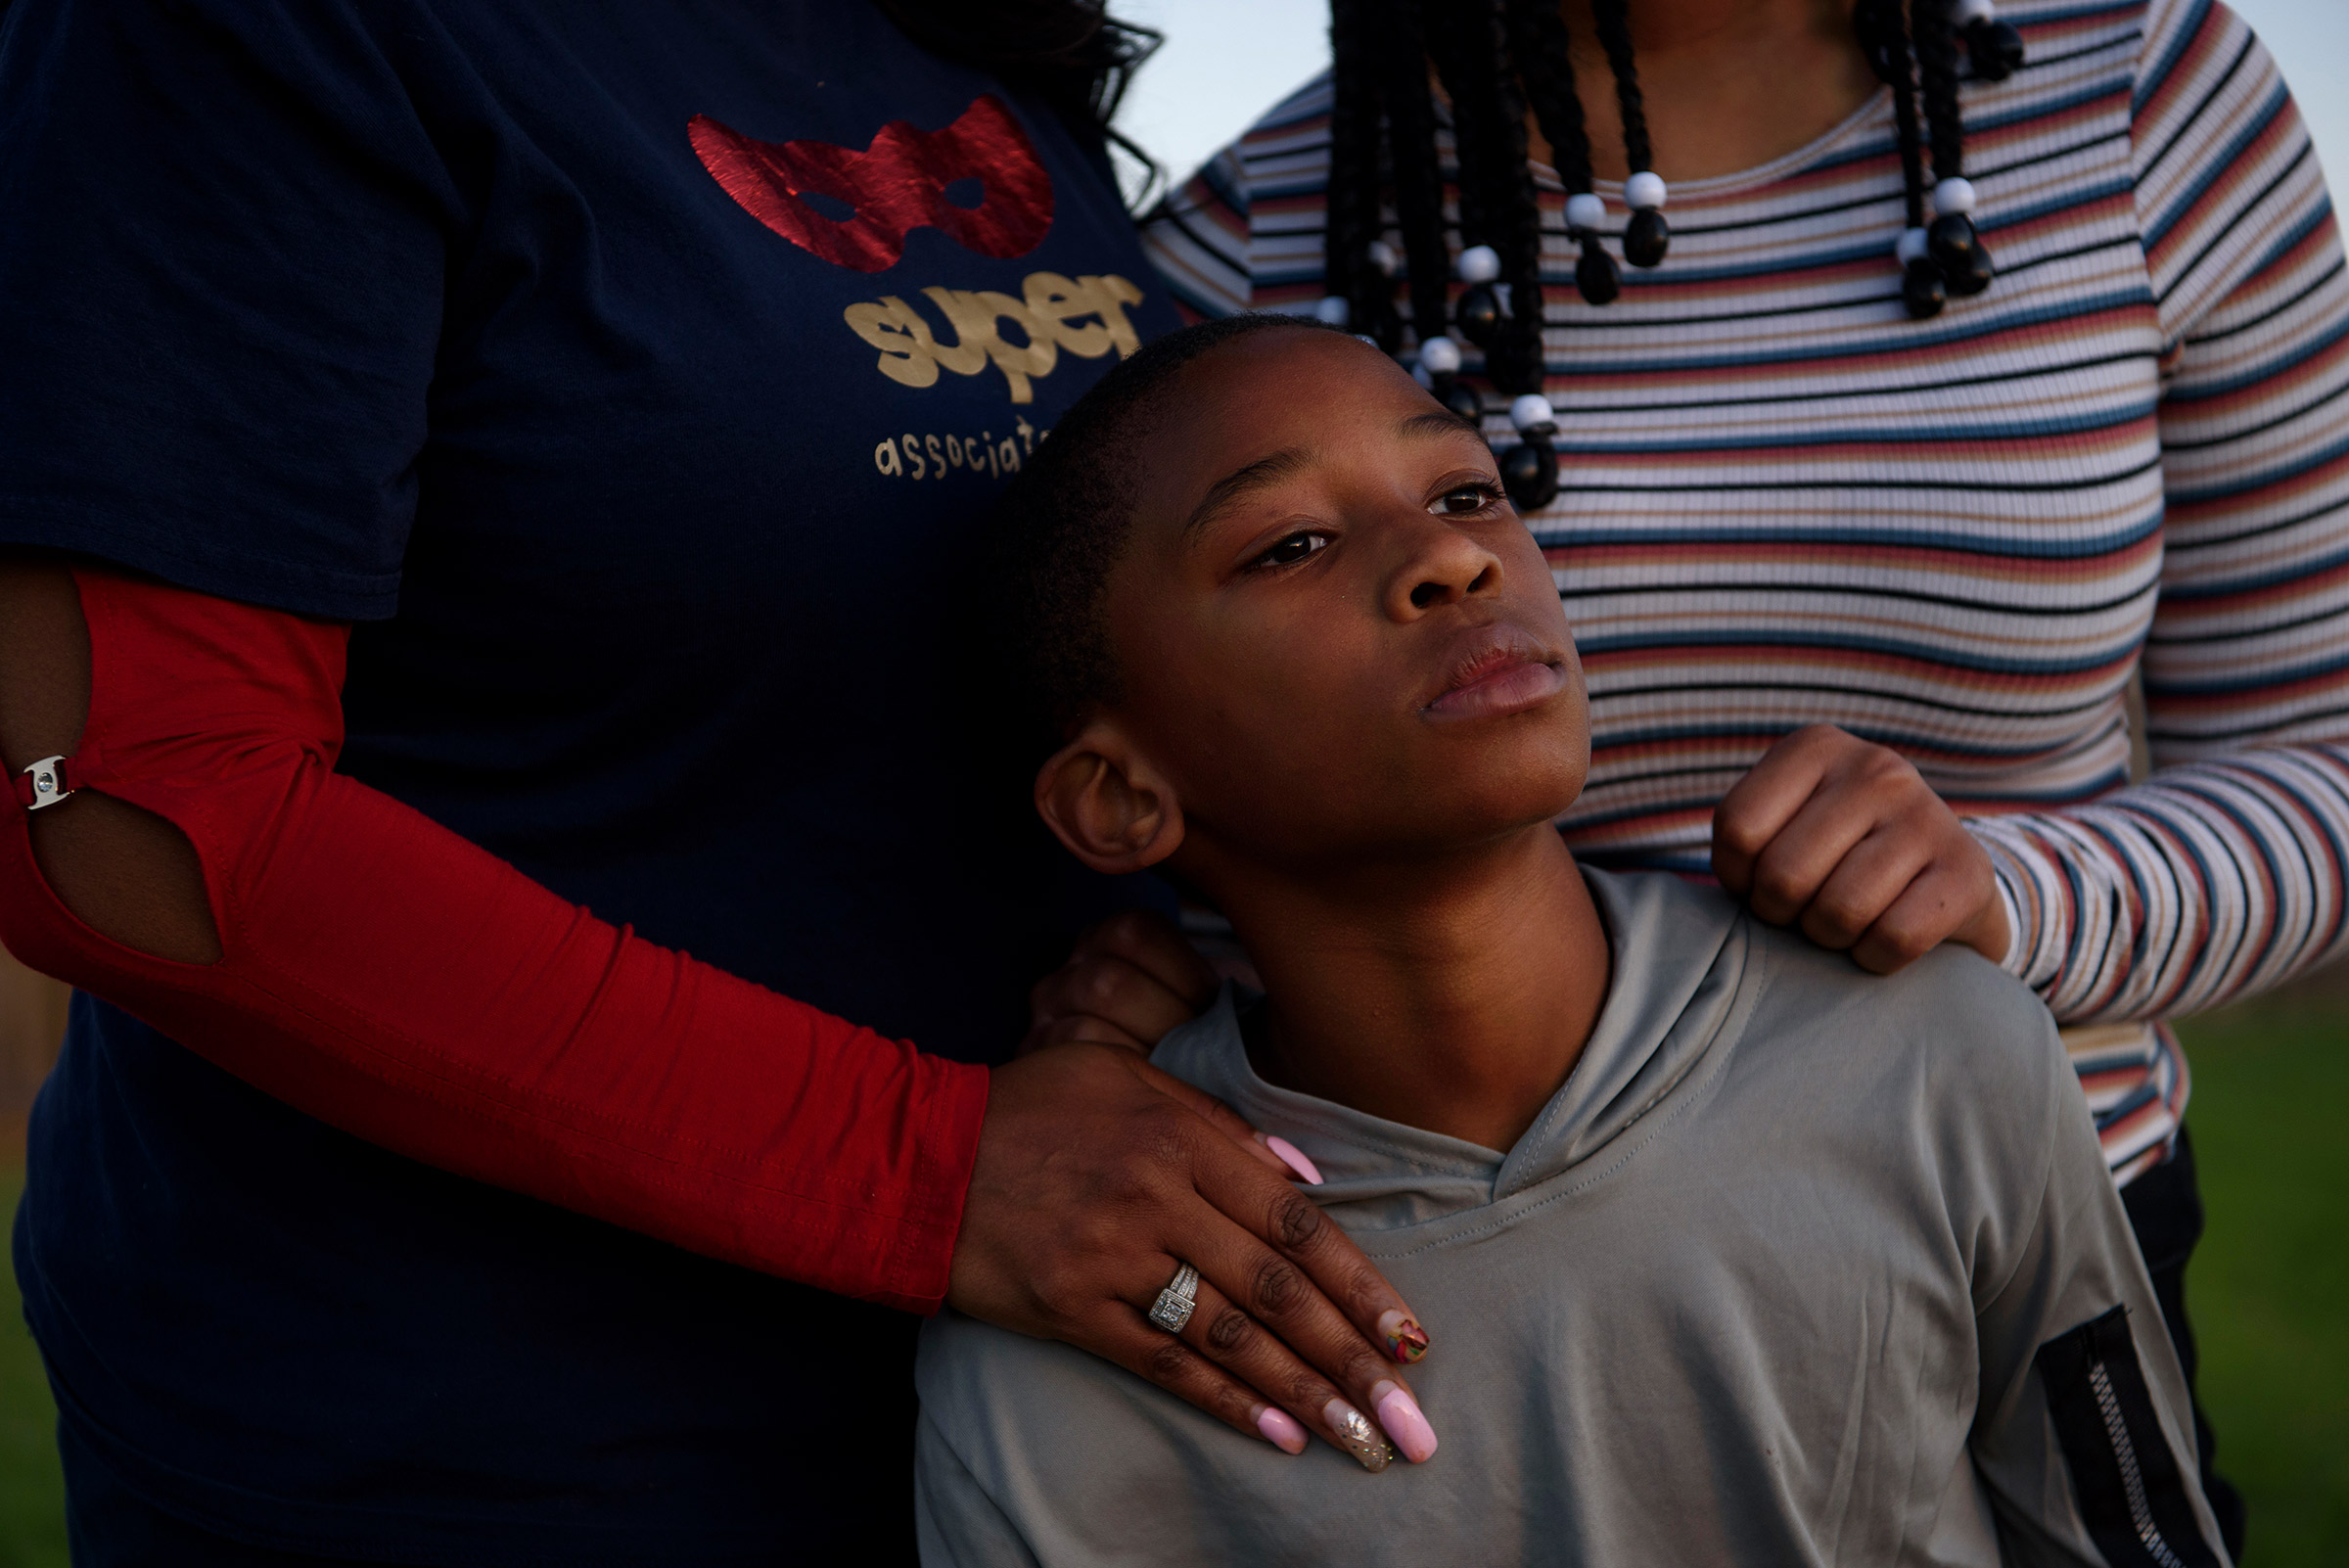 Adin James, 8, poses for a portrait alongside his sister, Madison, and his mother, Ebony, following his father, Terrence James' death, after becoming infected with COVID-19 in February. (Callaghan O'Hare for TIME)